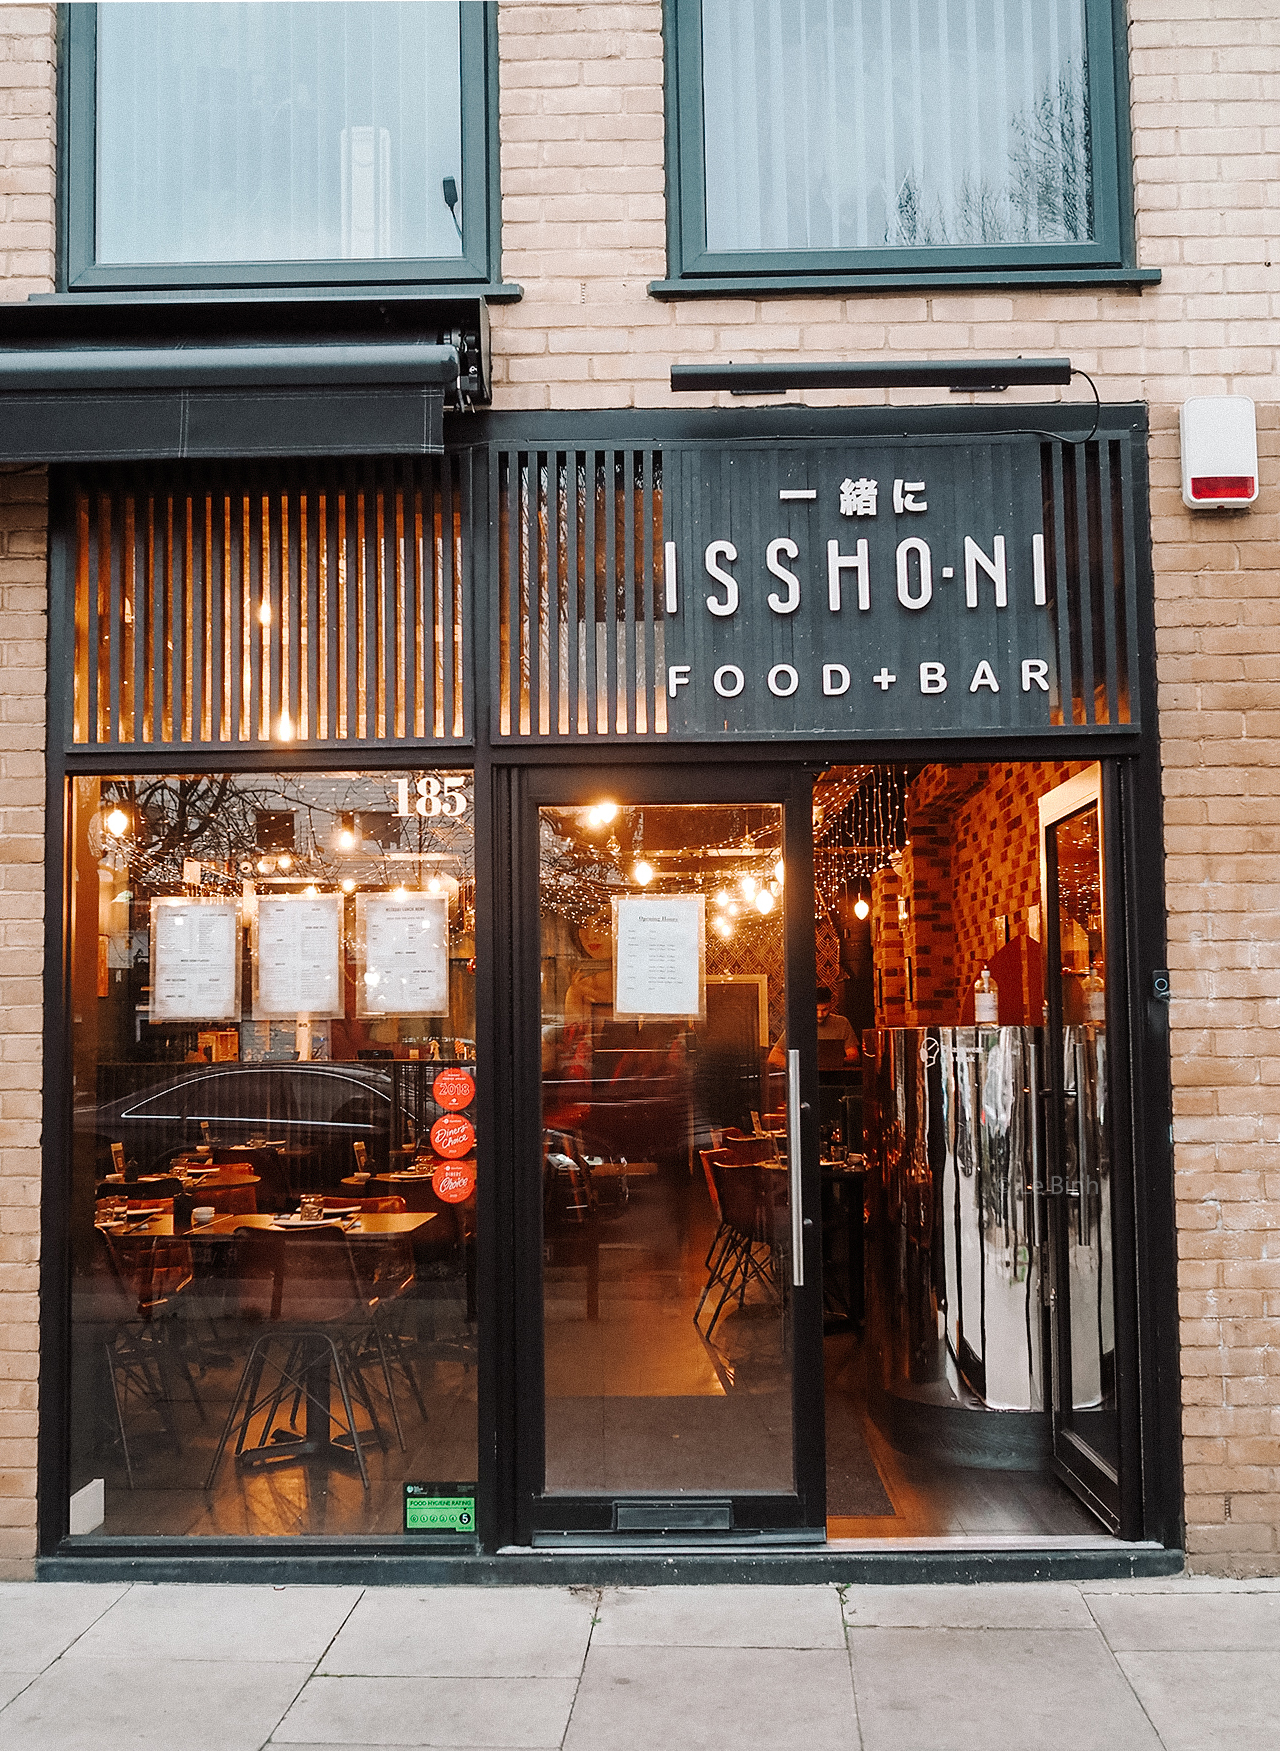 Issho-Ni food and bar outside Bethnal Green location